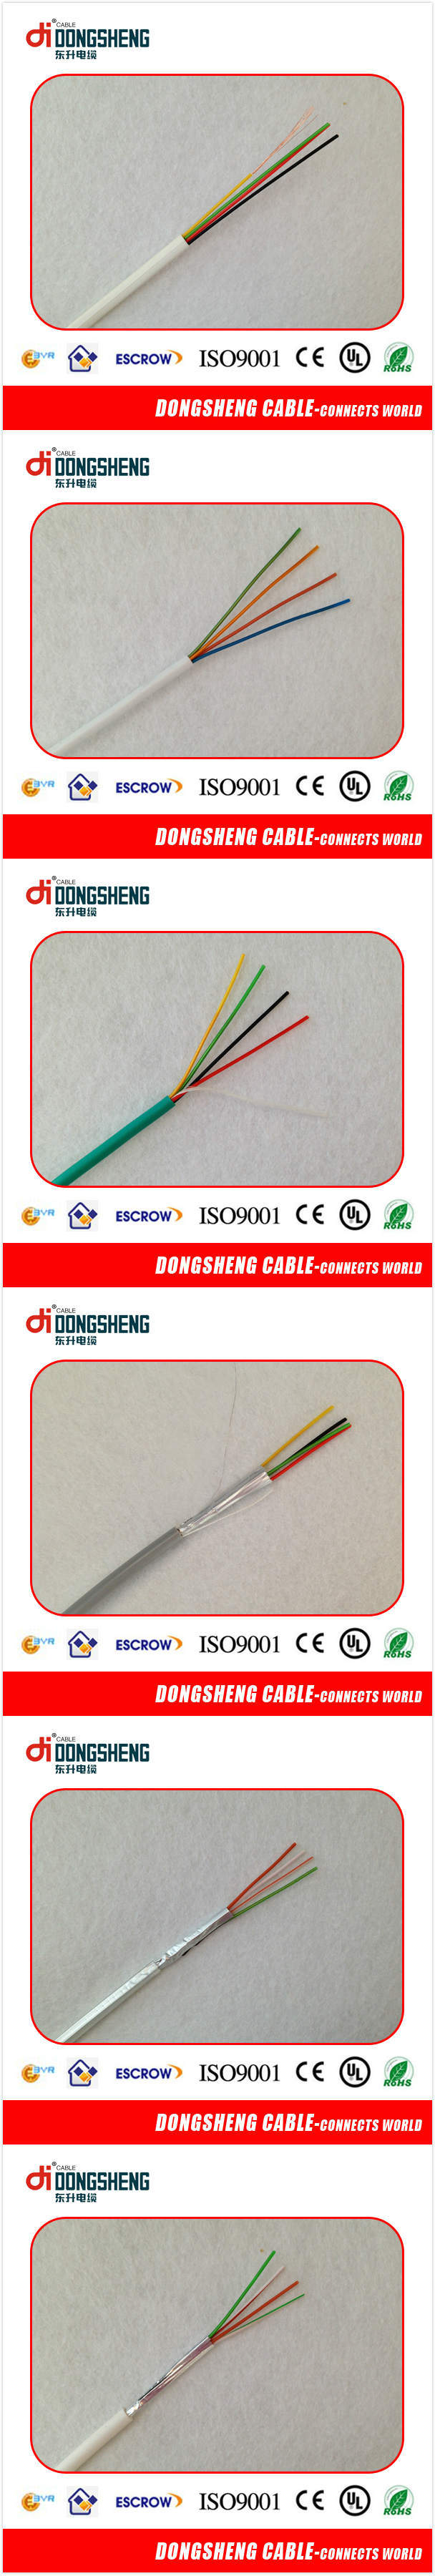 Telephone Drop Cable with CE, RoHS, ISO